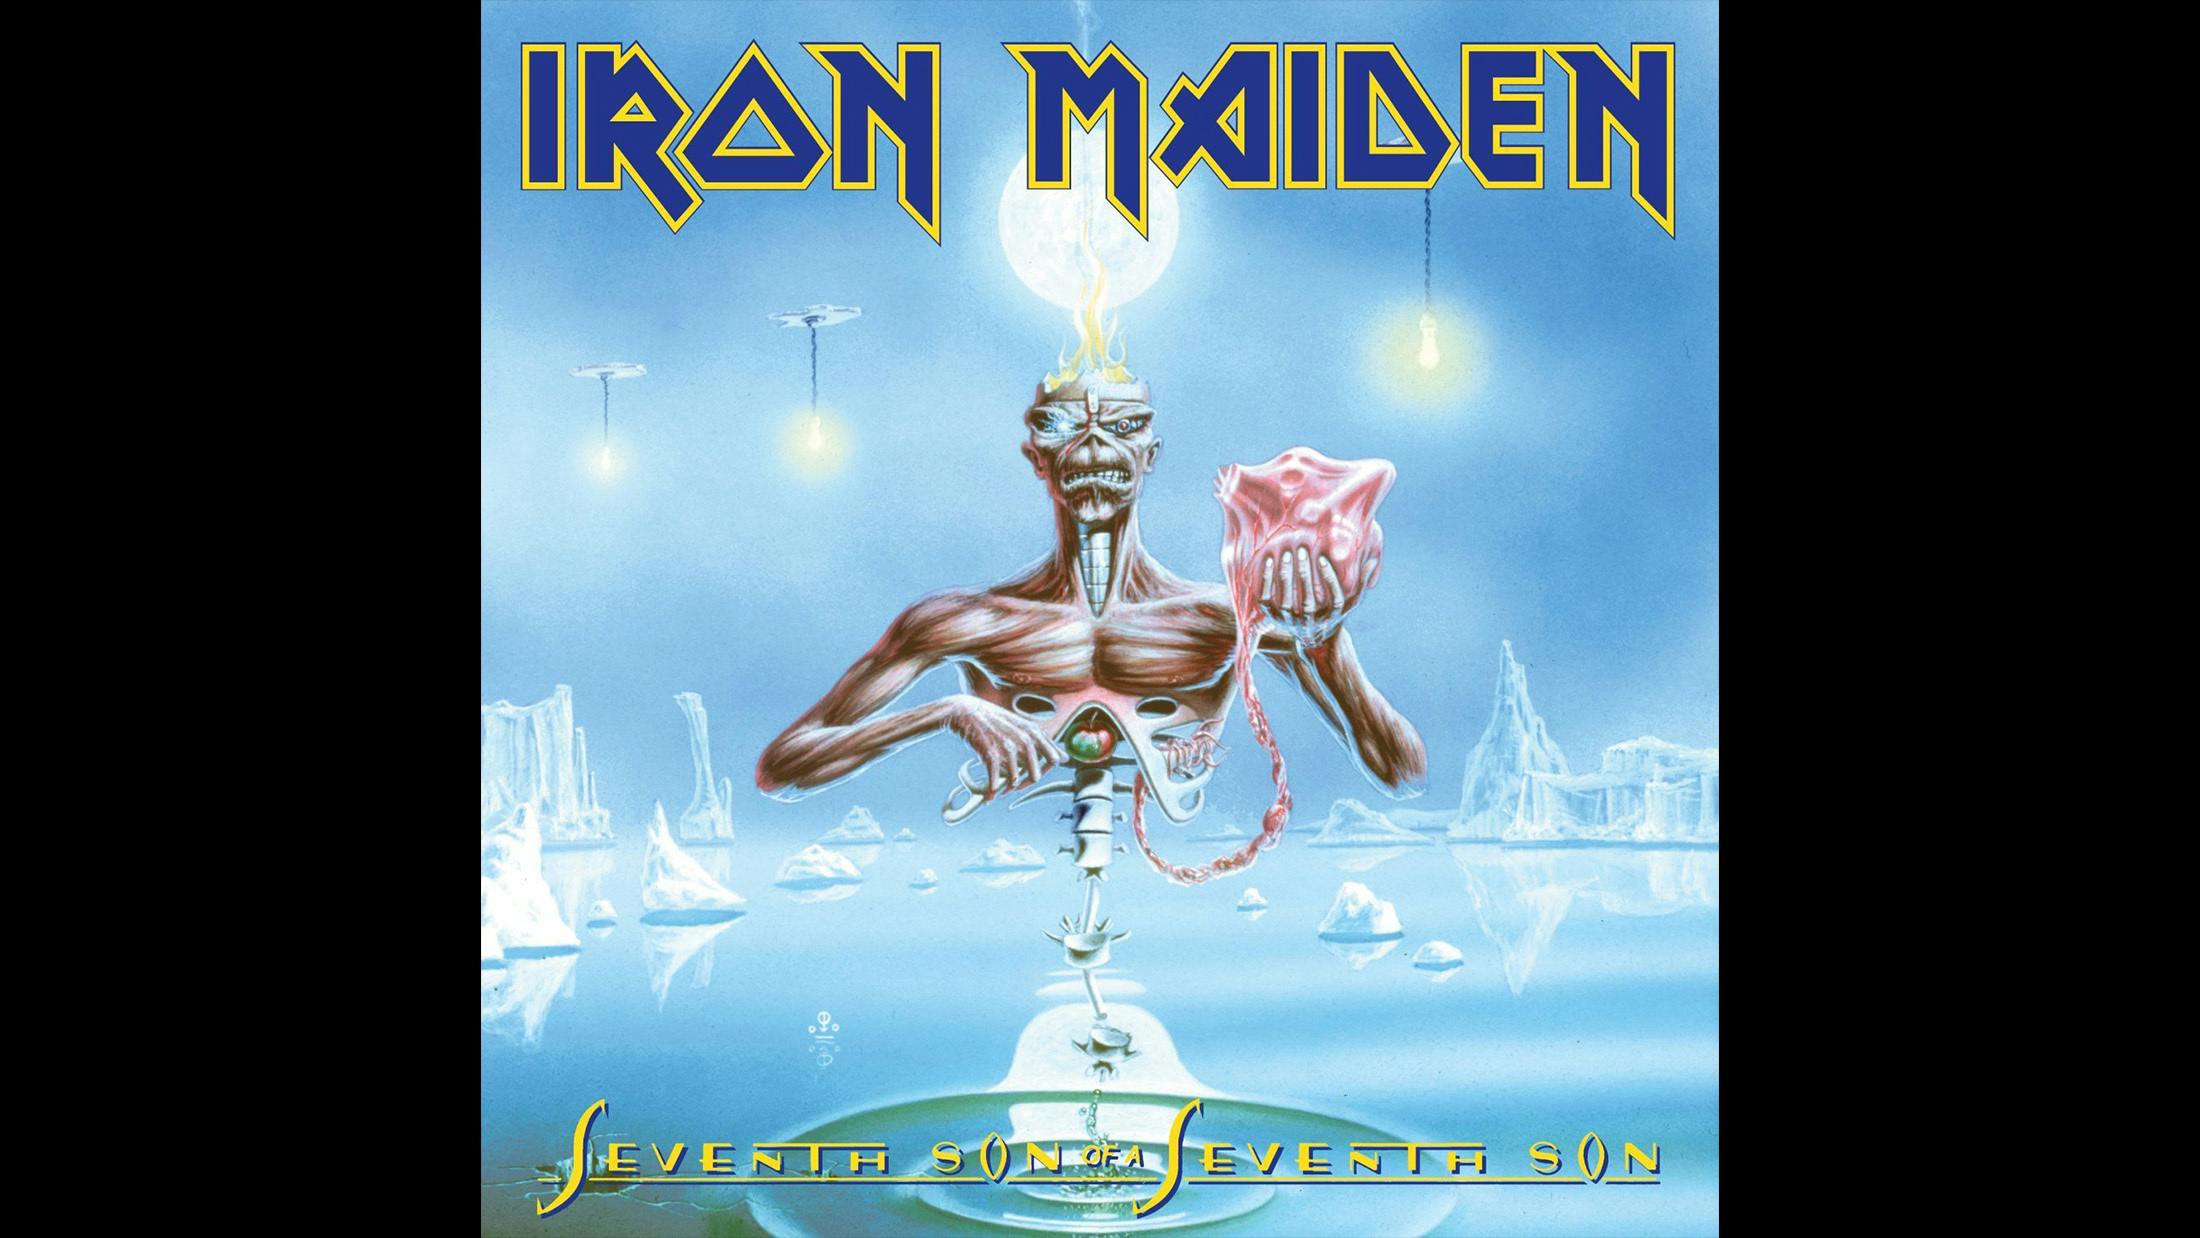 Iron Maiden’s last two studio albums, 2010’s The Final Frontier and 2015’s The Book Of Souls saw the metal legends’ flirtation with prog intensify. It’s nothing new, though; it began three decades ago on Seventh Son Of A Seventh Son. Maiden’s seventh album featured other firsts, too: it was the first to feature the band’s ‘classic’ line up, and the first to feature keyboards. It’s also a concept album, though not one that’s particularly easy to navigate. For sheer ambition, it’s an unbeatable addition to Maiden’s discography.